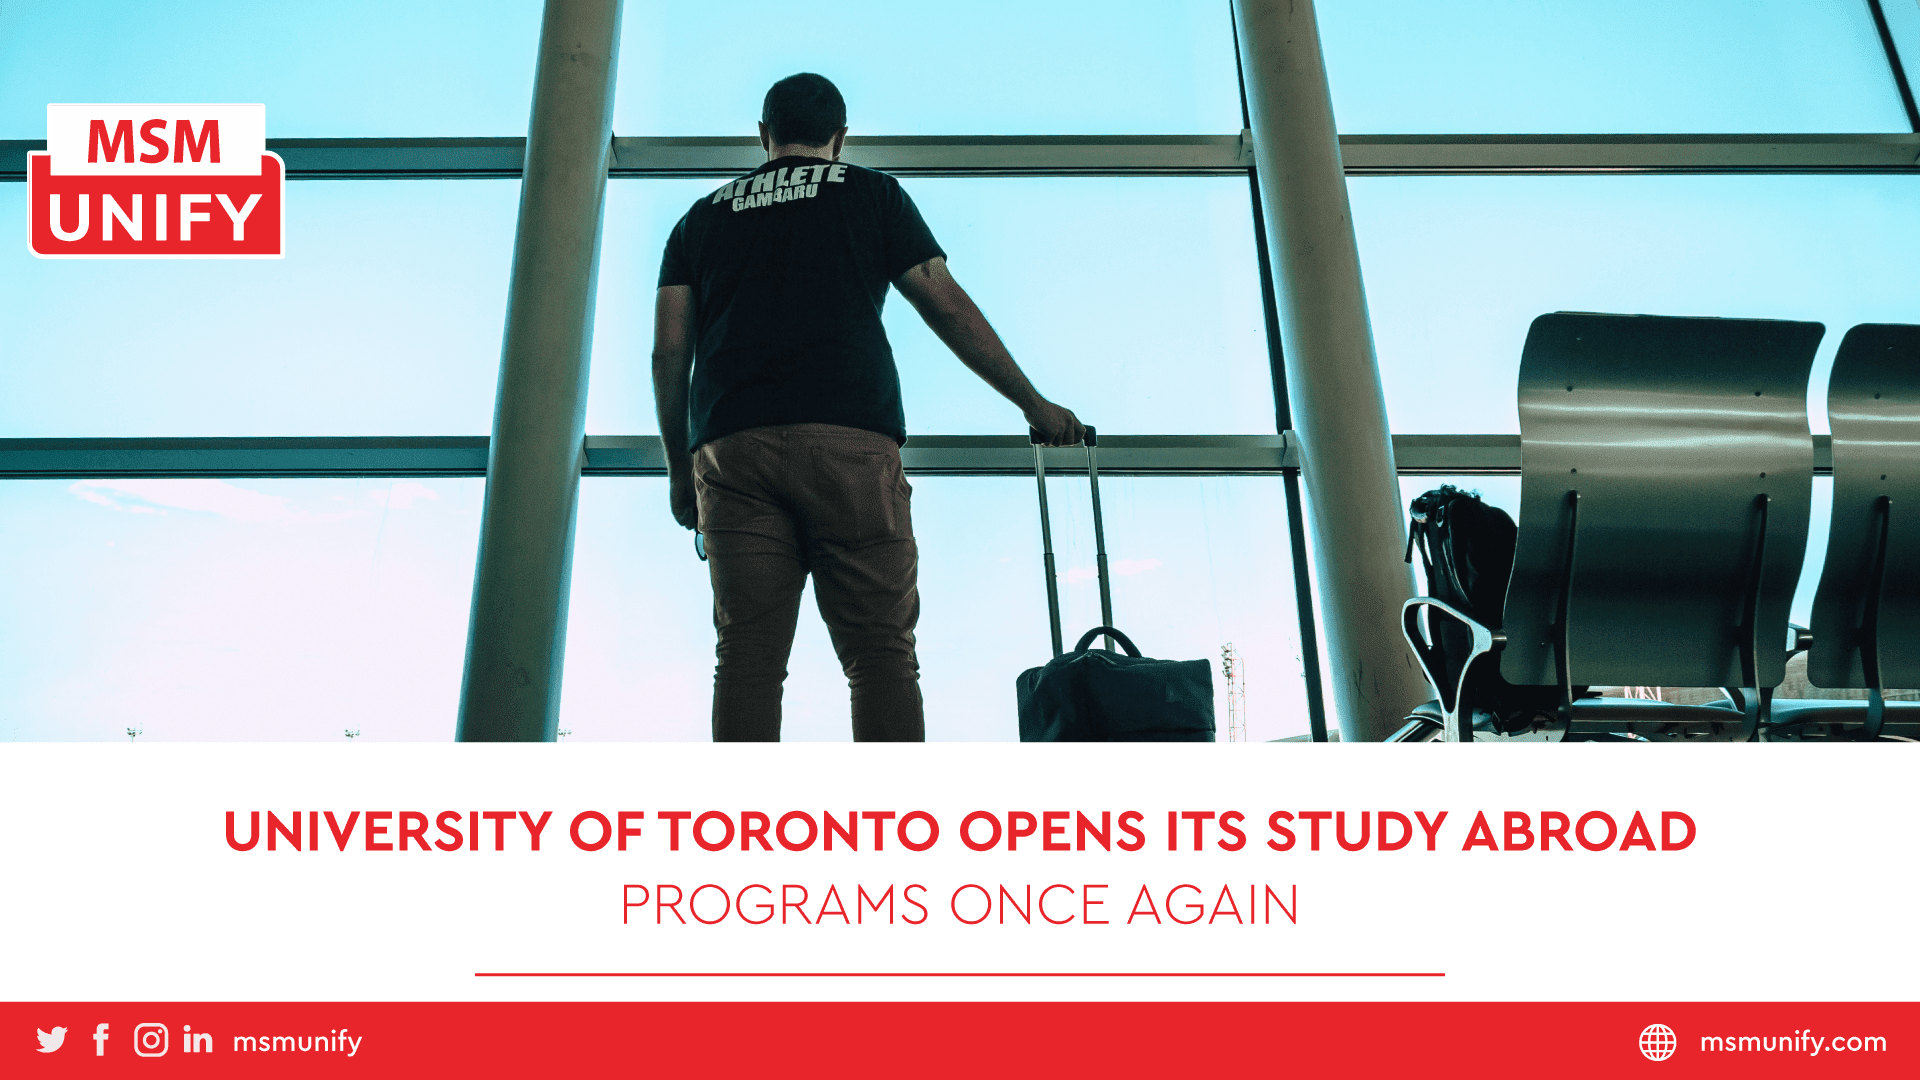 MSM Unify University of Toronto Opens its Study Abroad Programs Once Again min